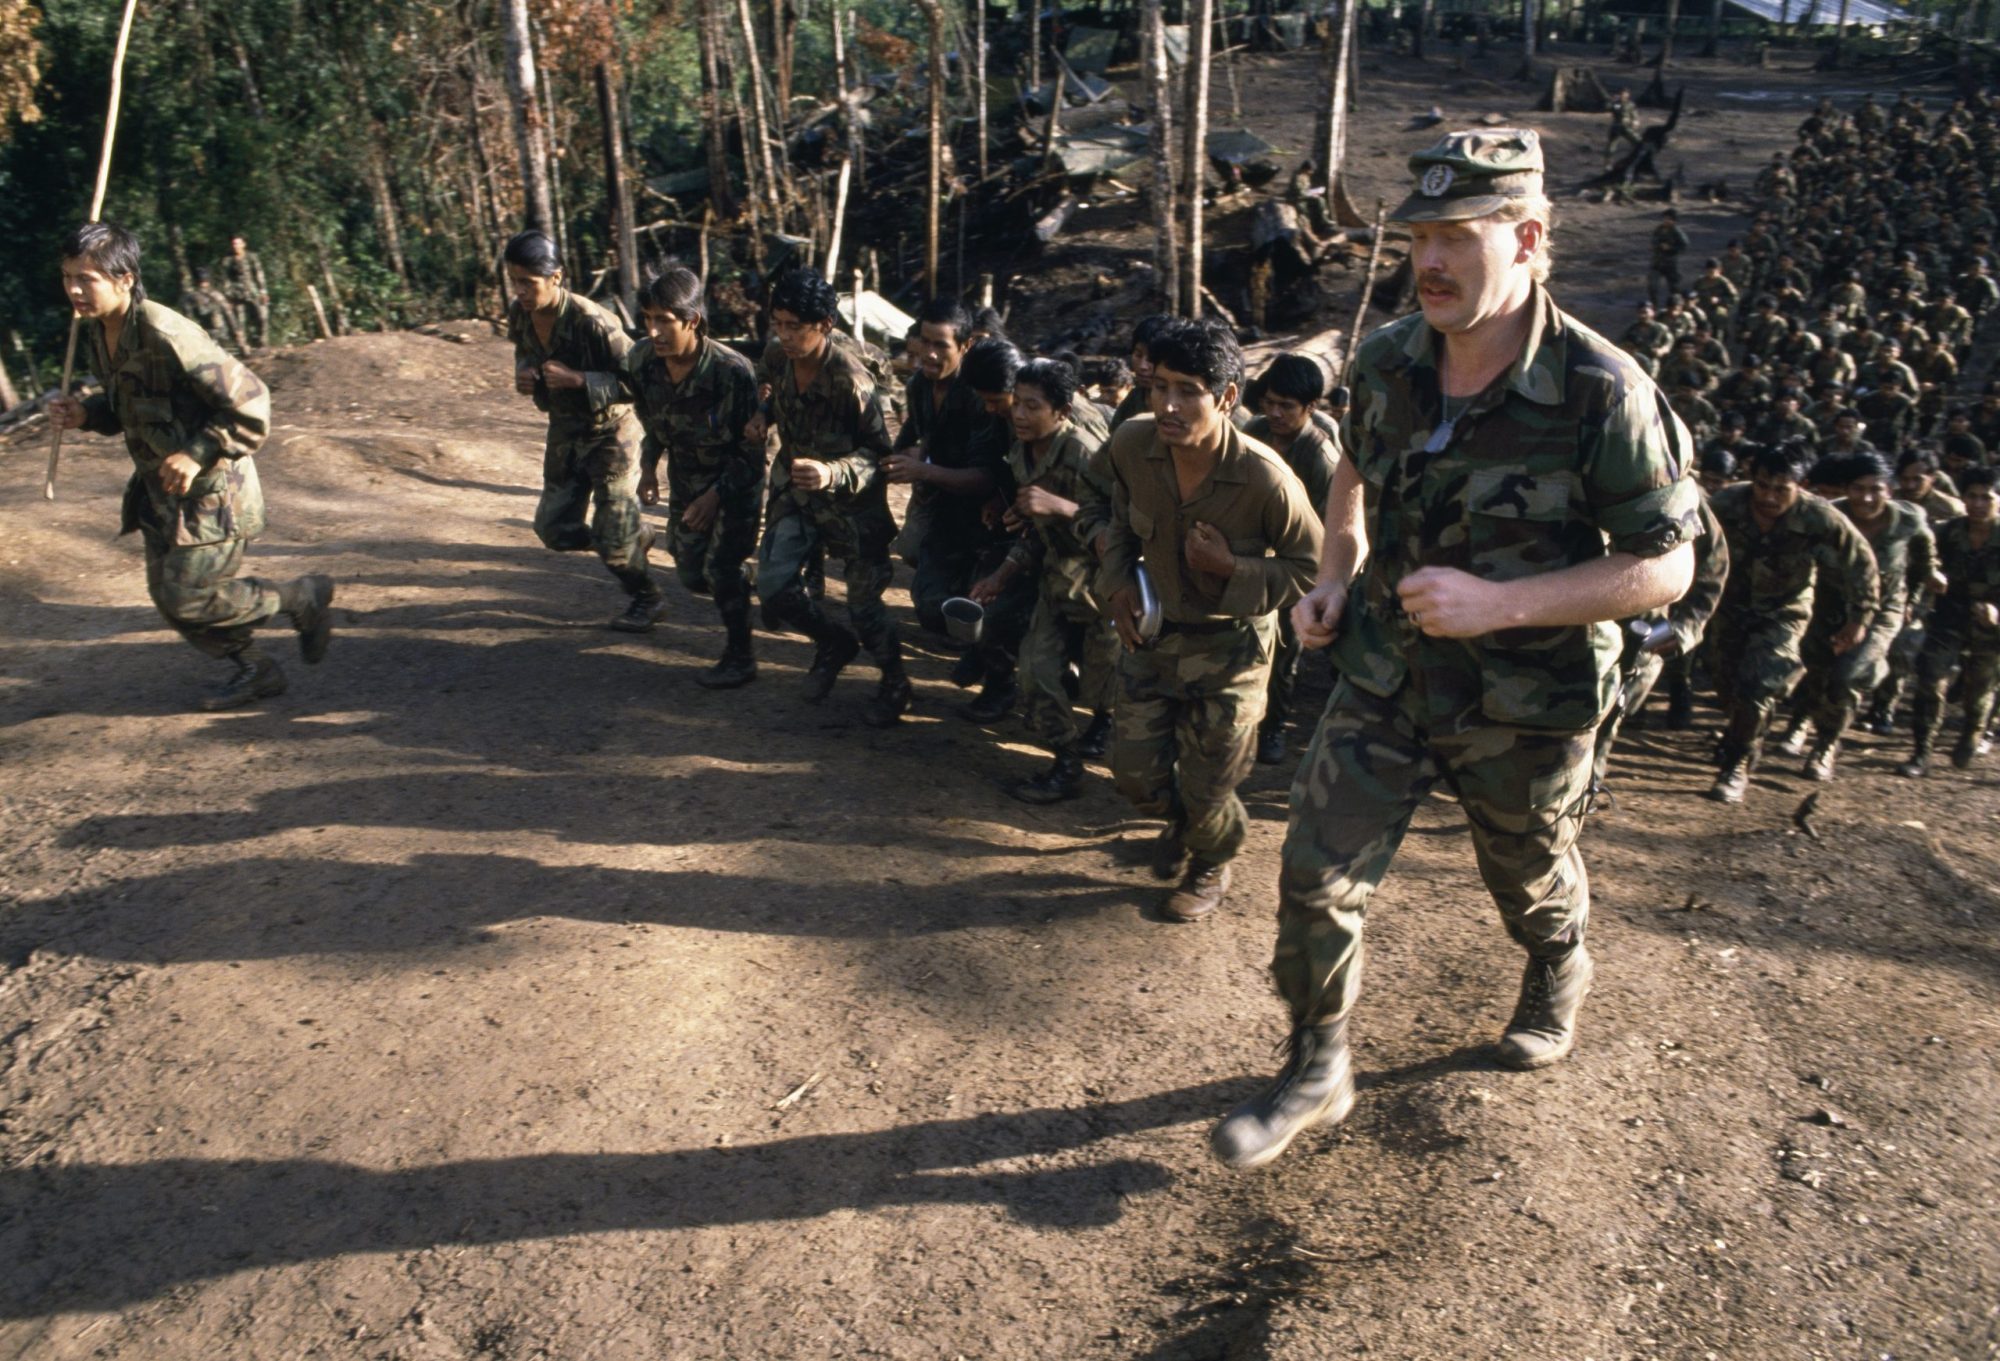 Contras fighters train with instructors of the American army. Photo by Jason Bleibtreu/Sygma/Sygma via Getty Images